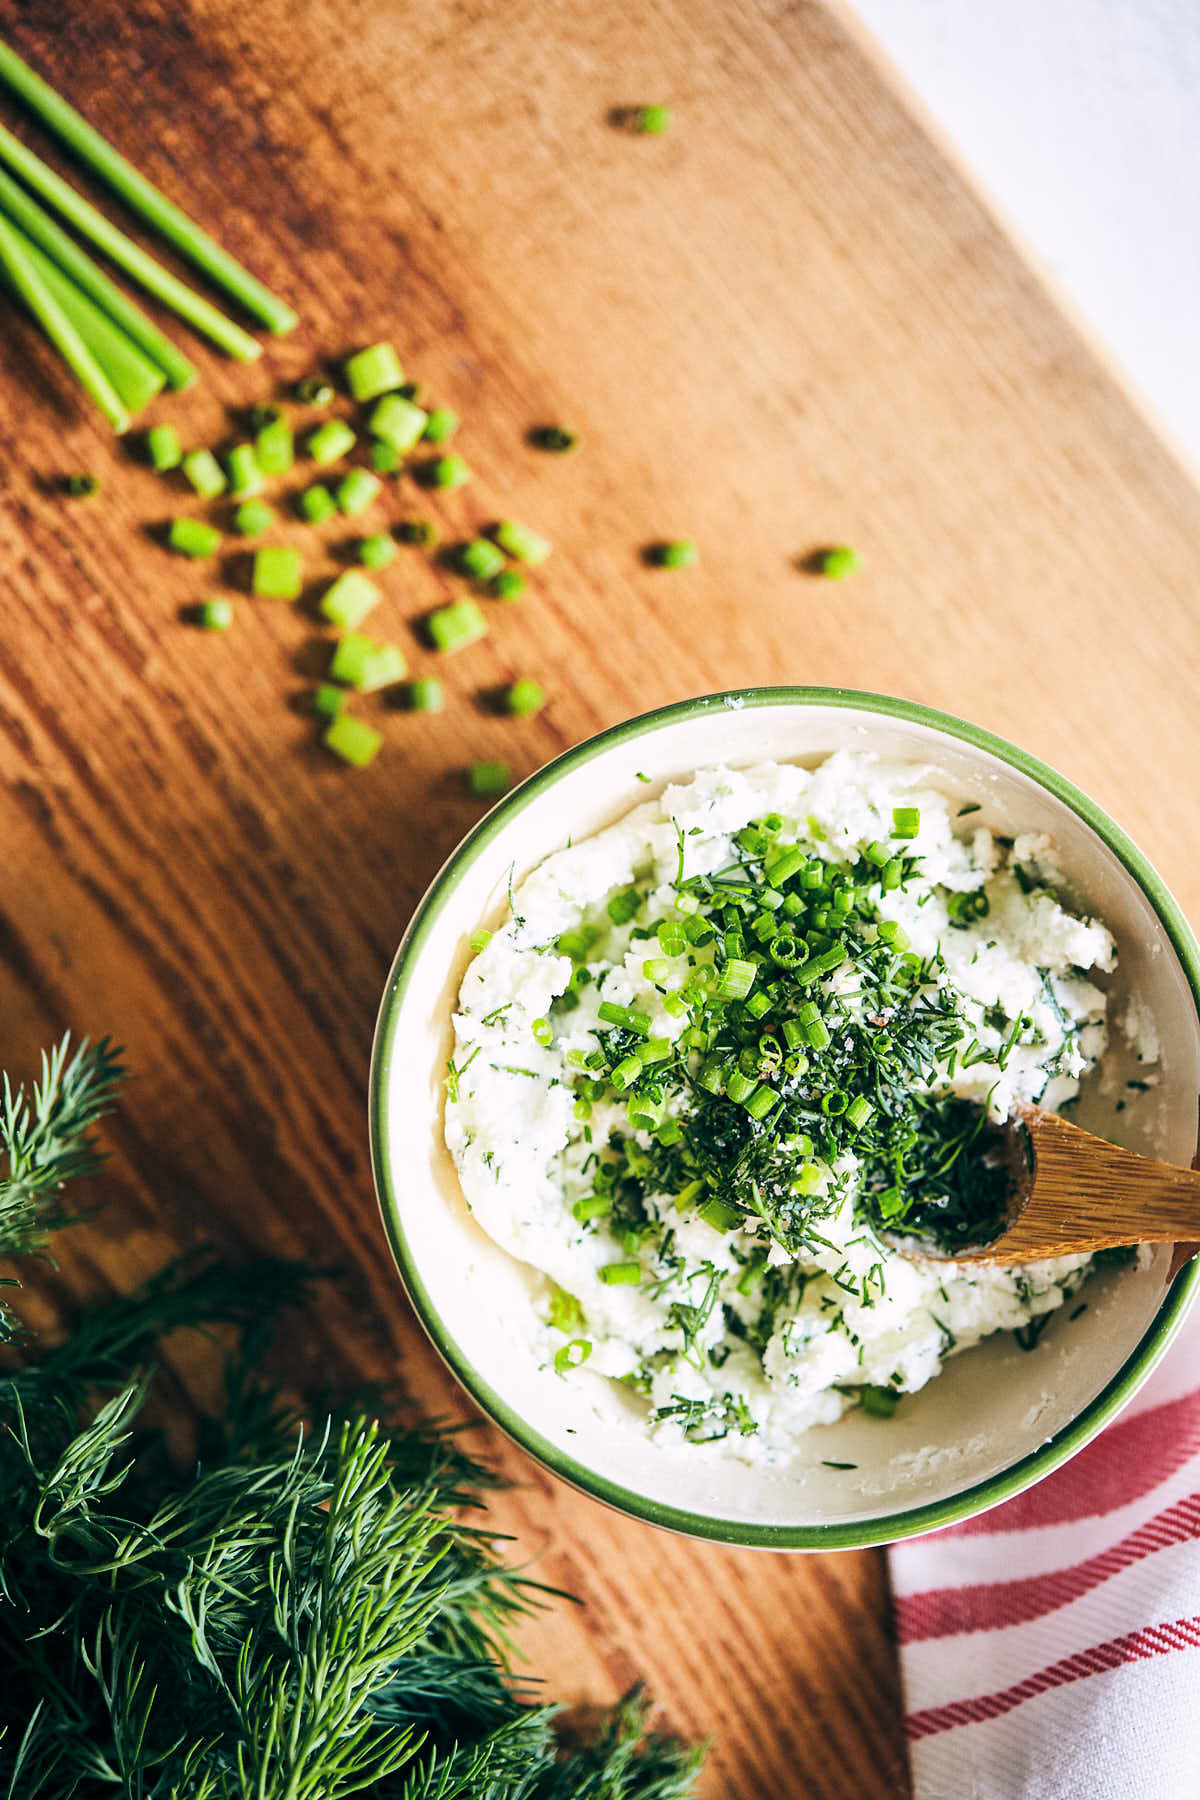 Goat cheese topping with fresh herbs mixed in